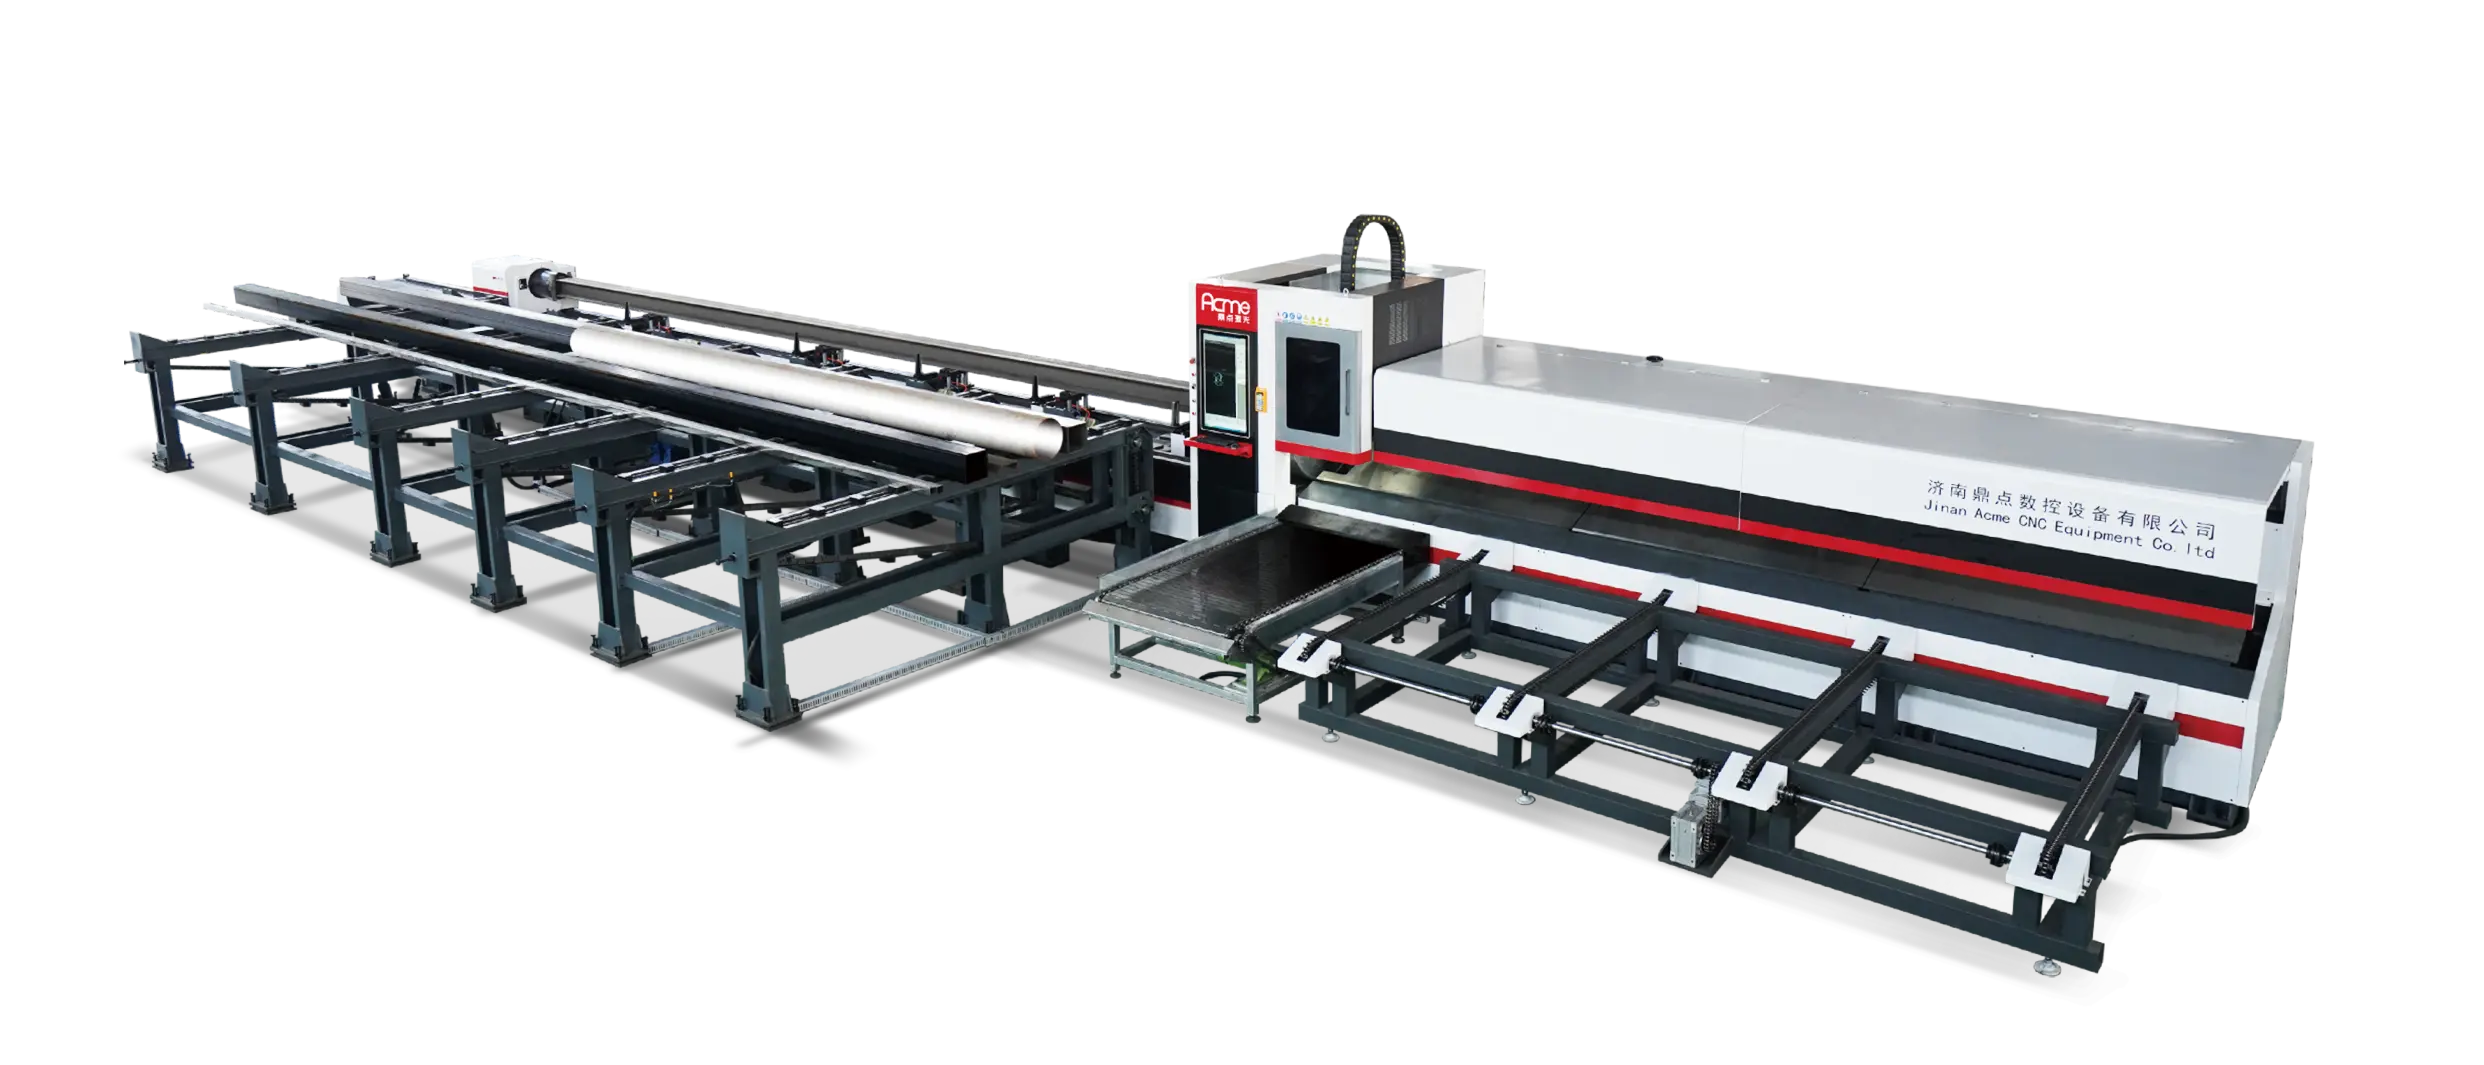 12M TUBE LENGTH HEAVY TUBES TUBE CUTTING MACHINE WITH 350MM CHUCK